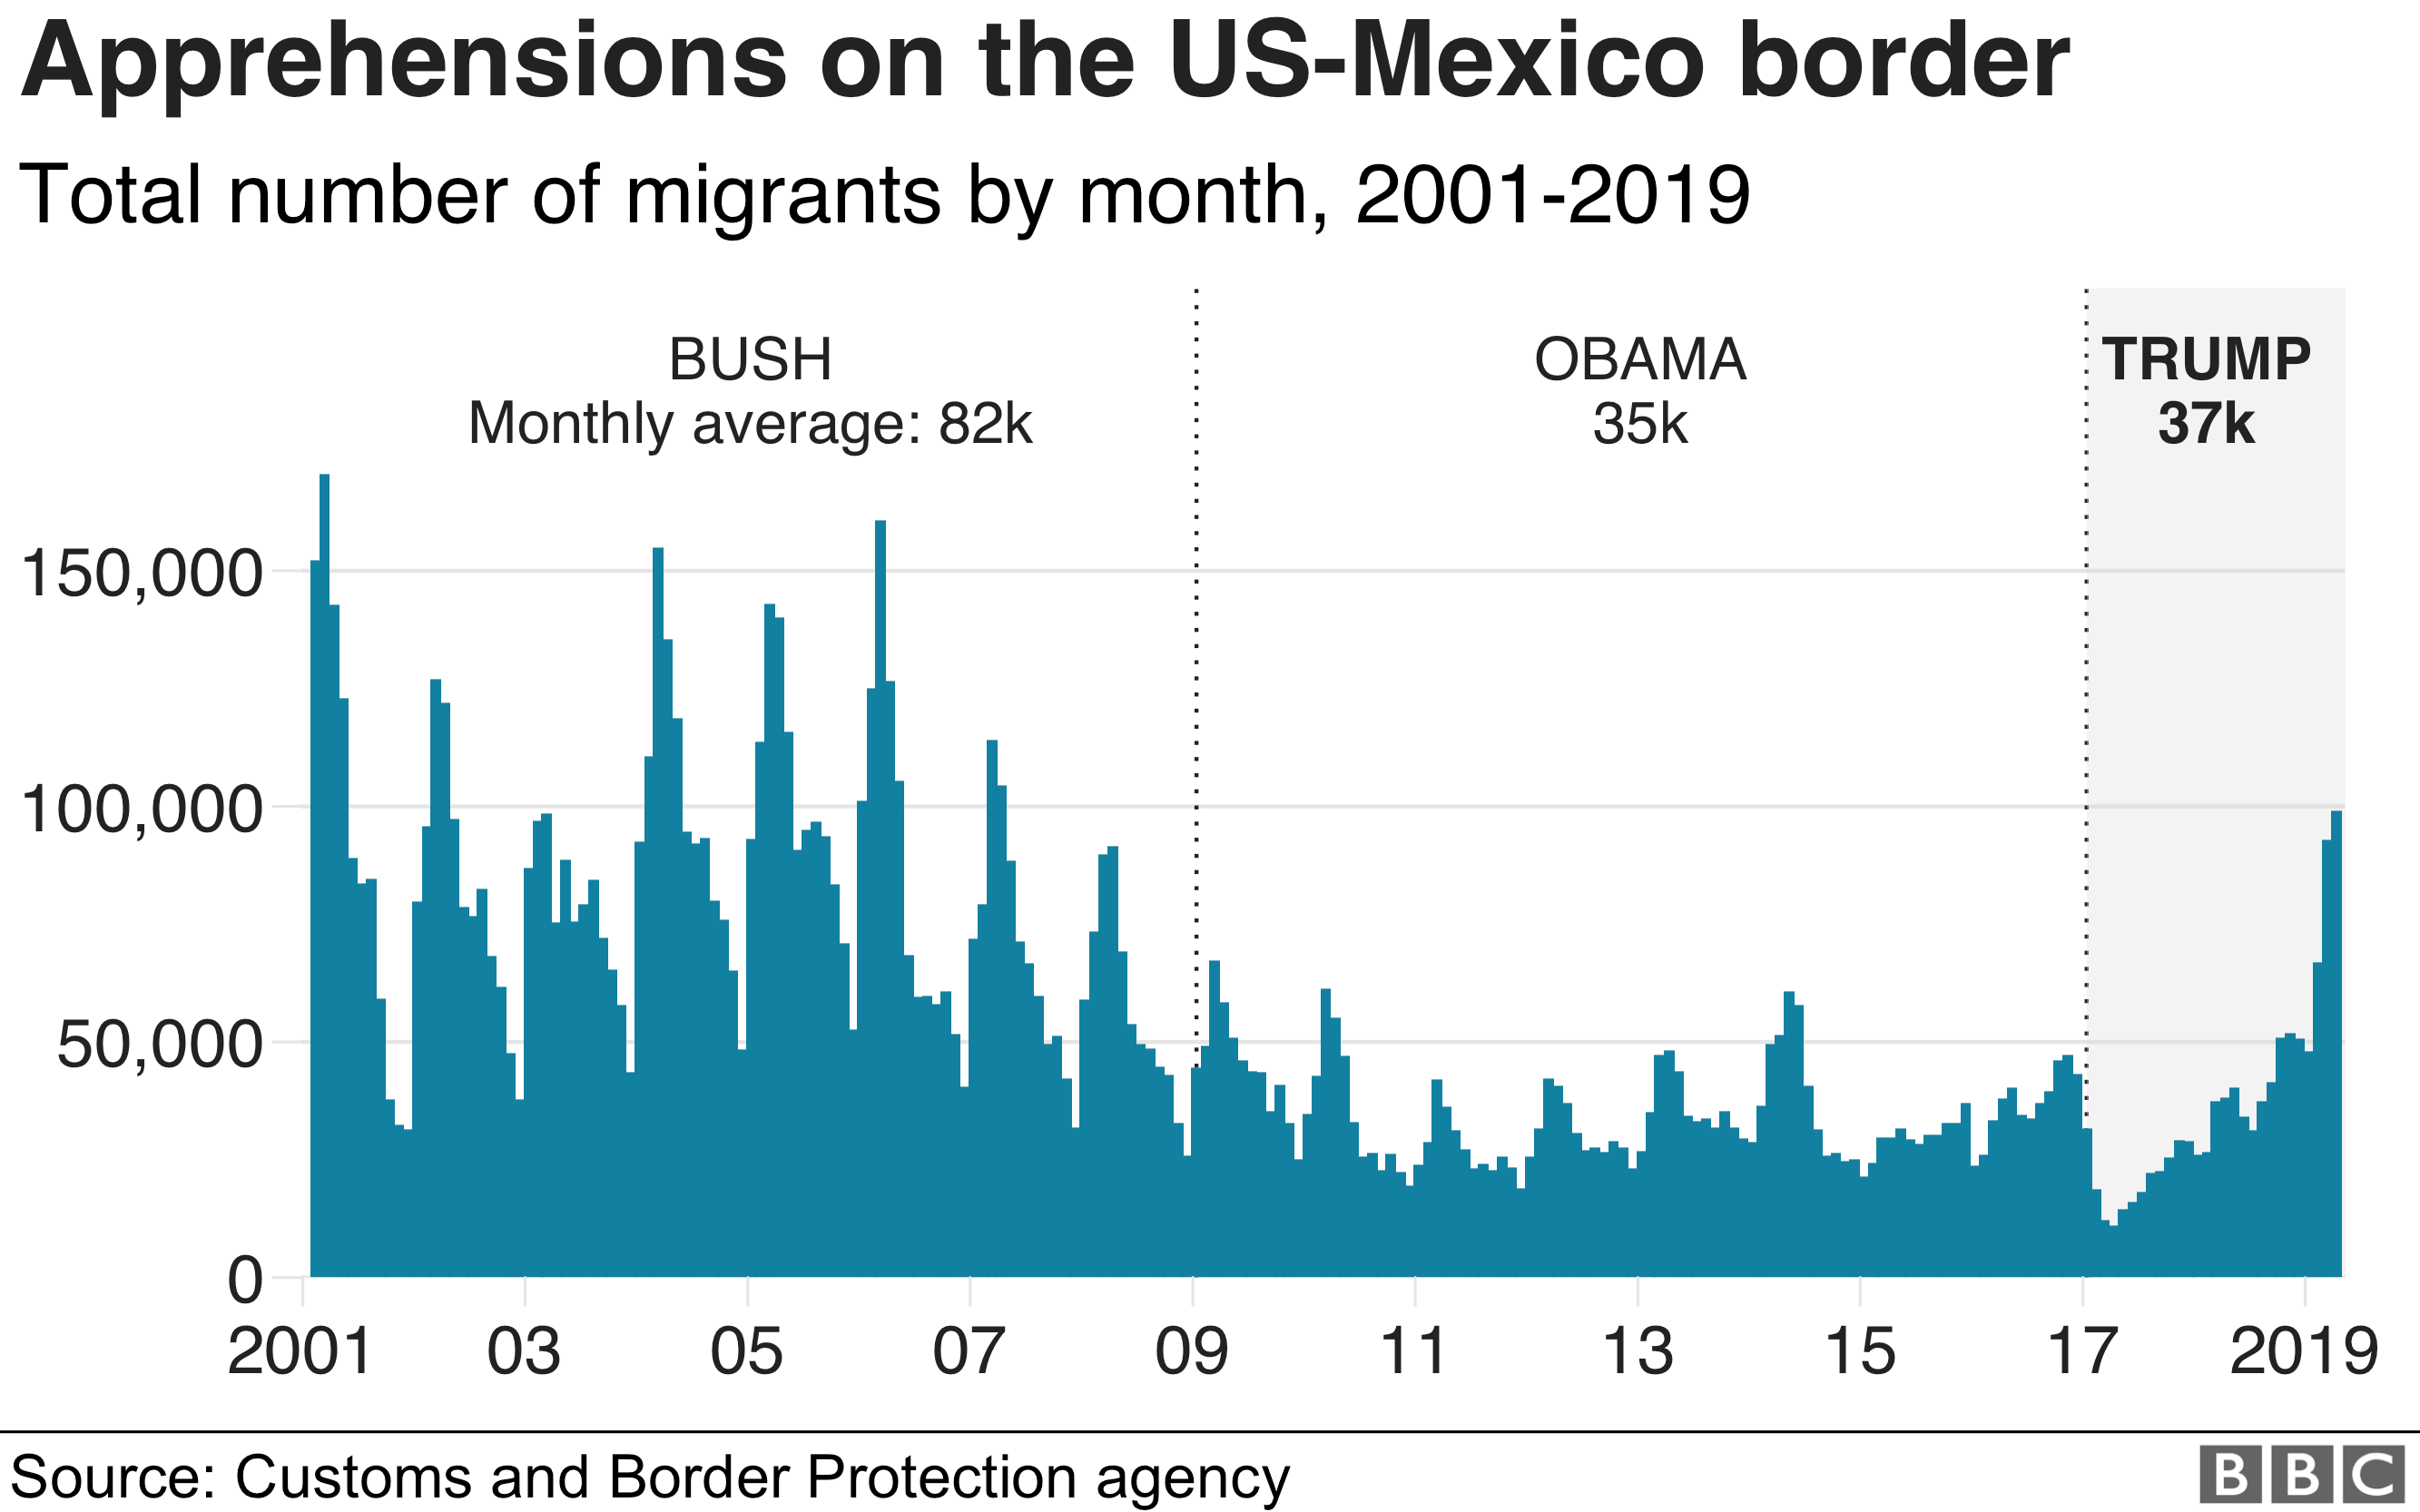 A graph showing apprehensions along the border